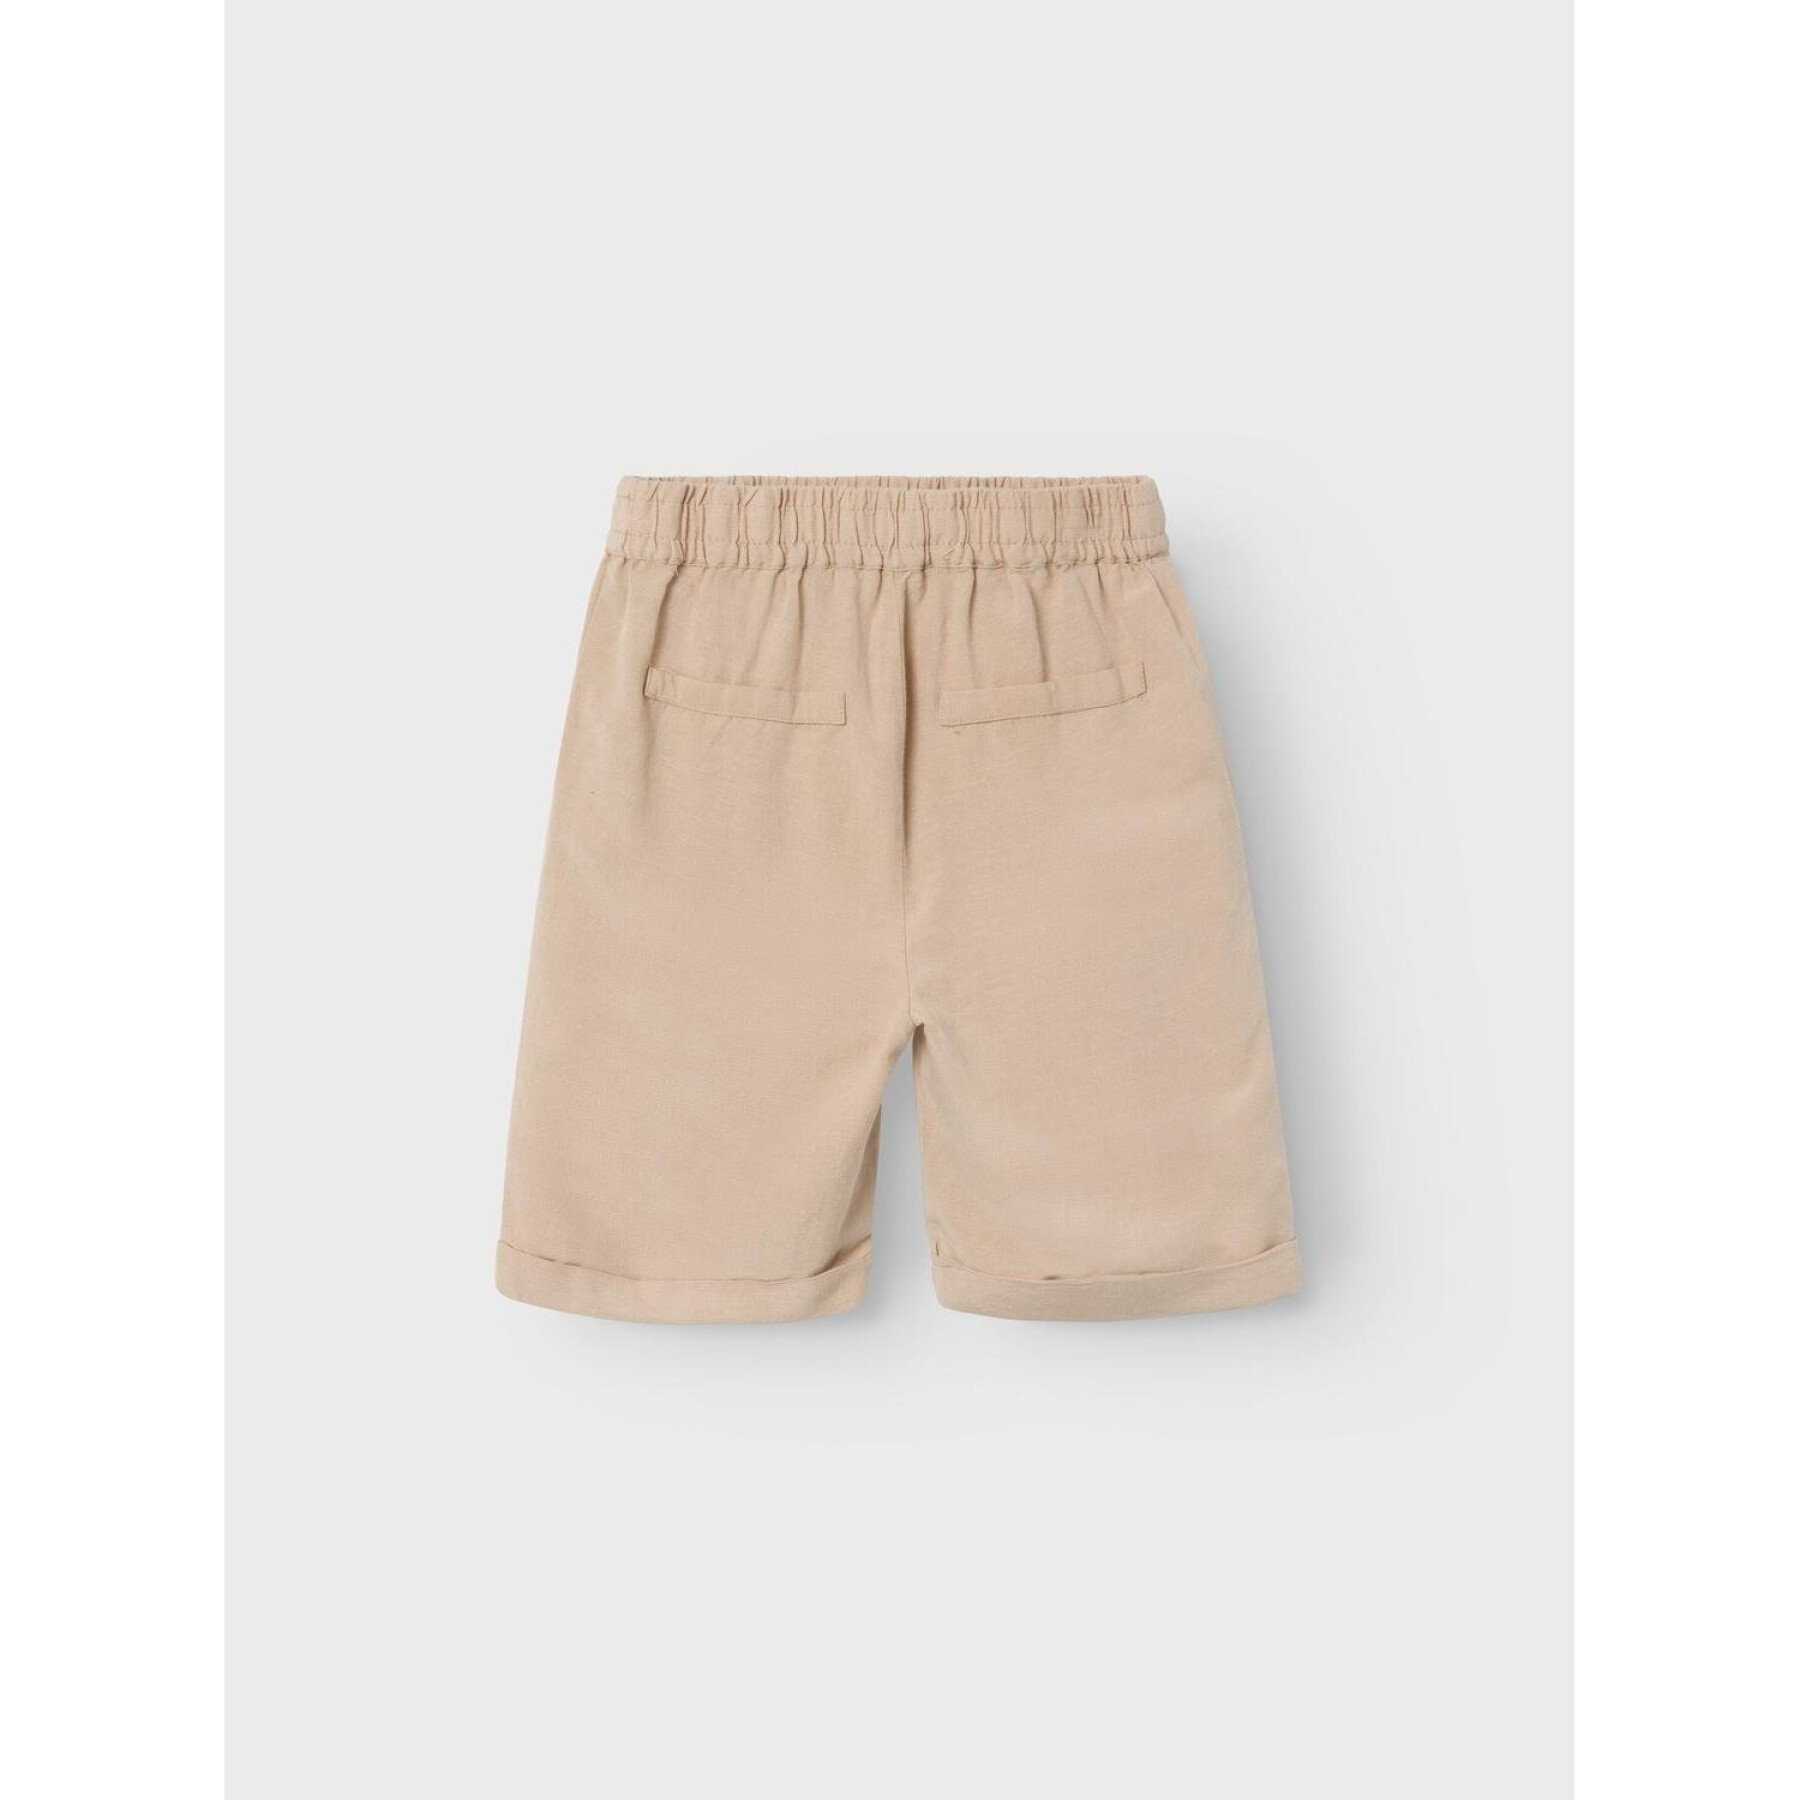 Children's shorts Name it Faher